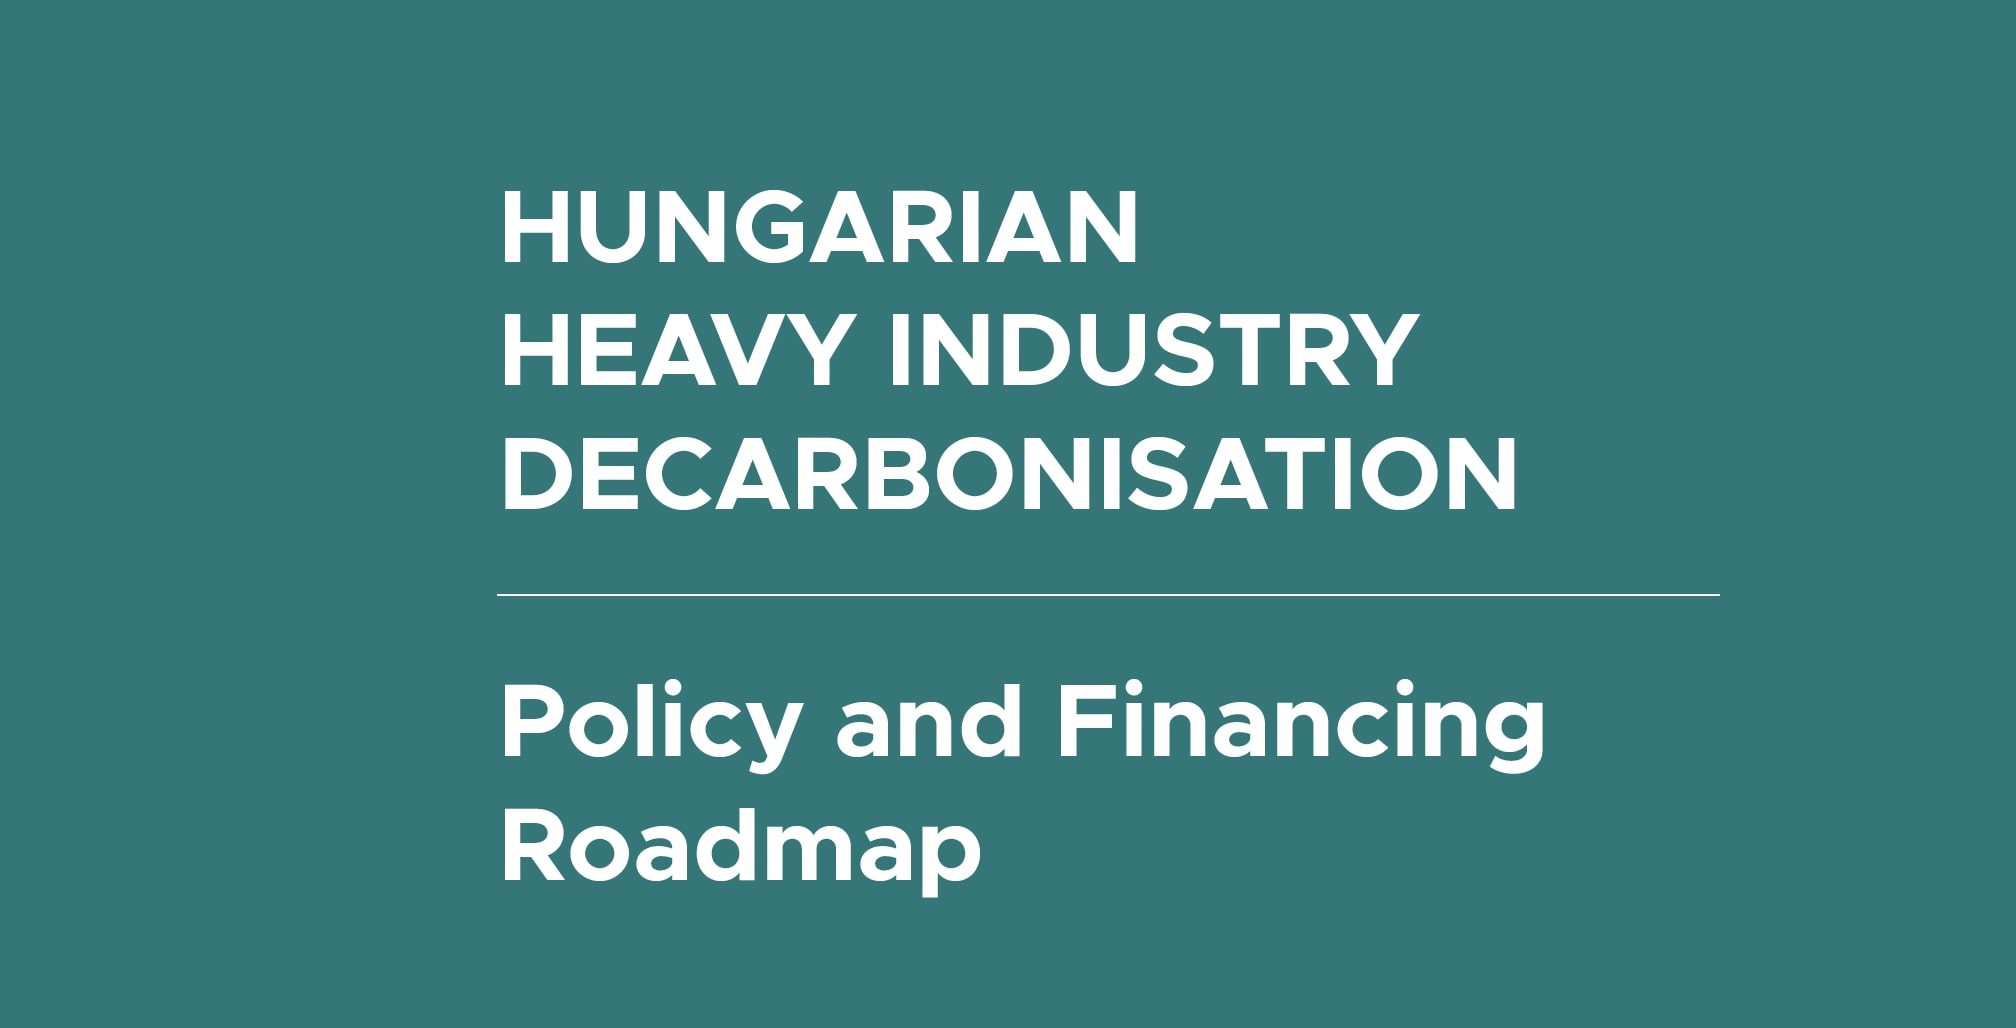 Hungarian heavy industry decarbonisation